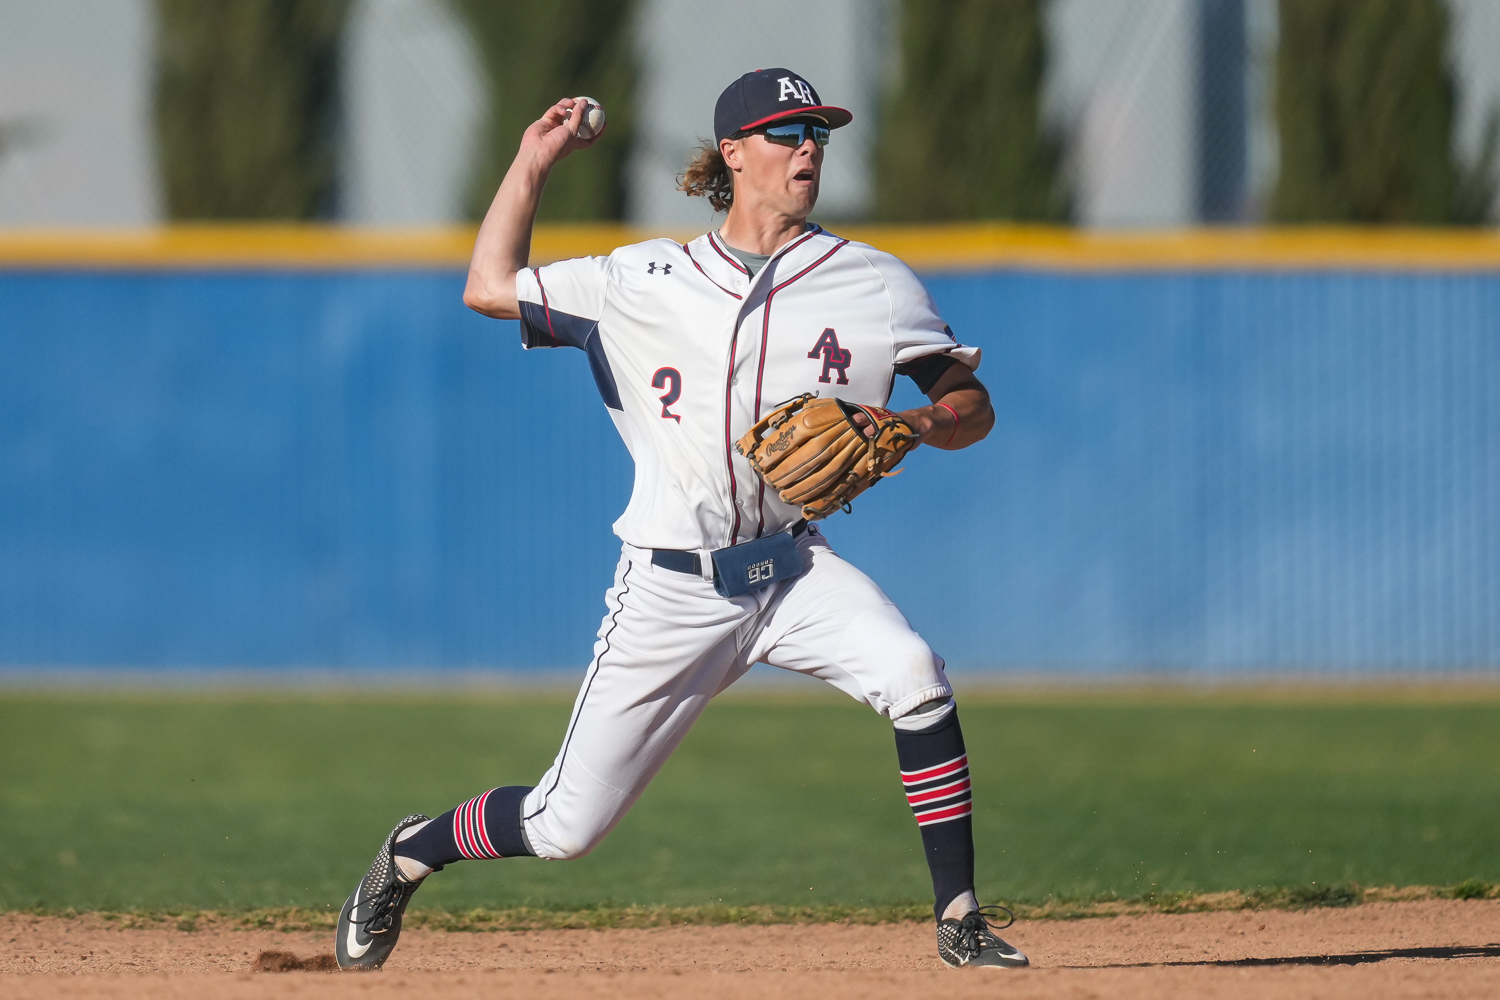 Baseball Drops Messy One to Cosumnes River